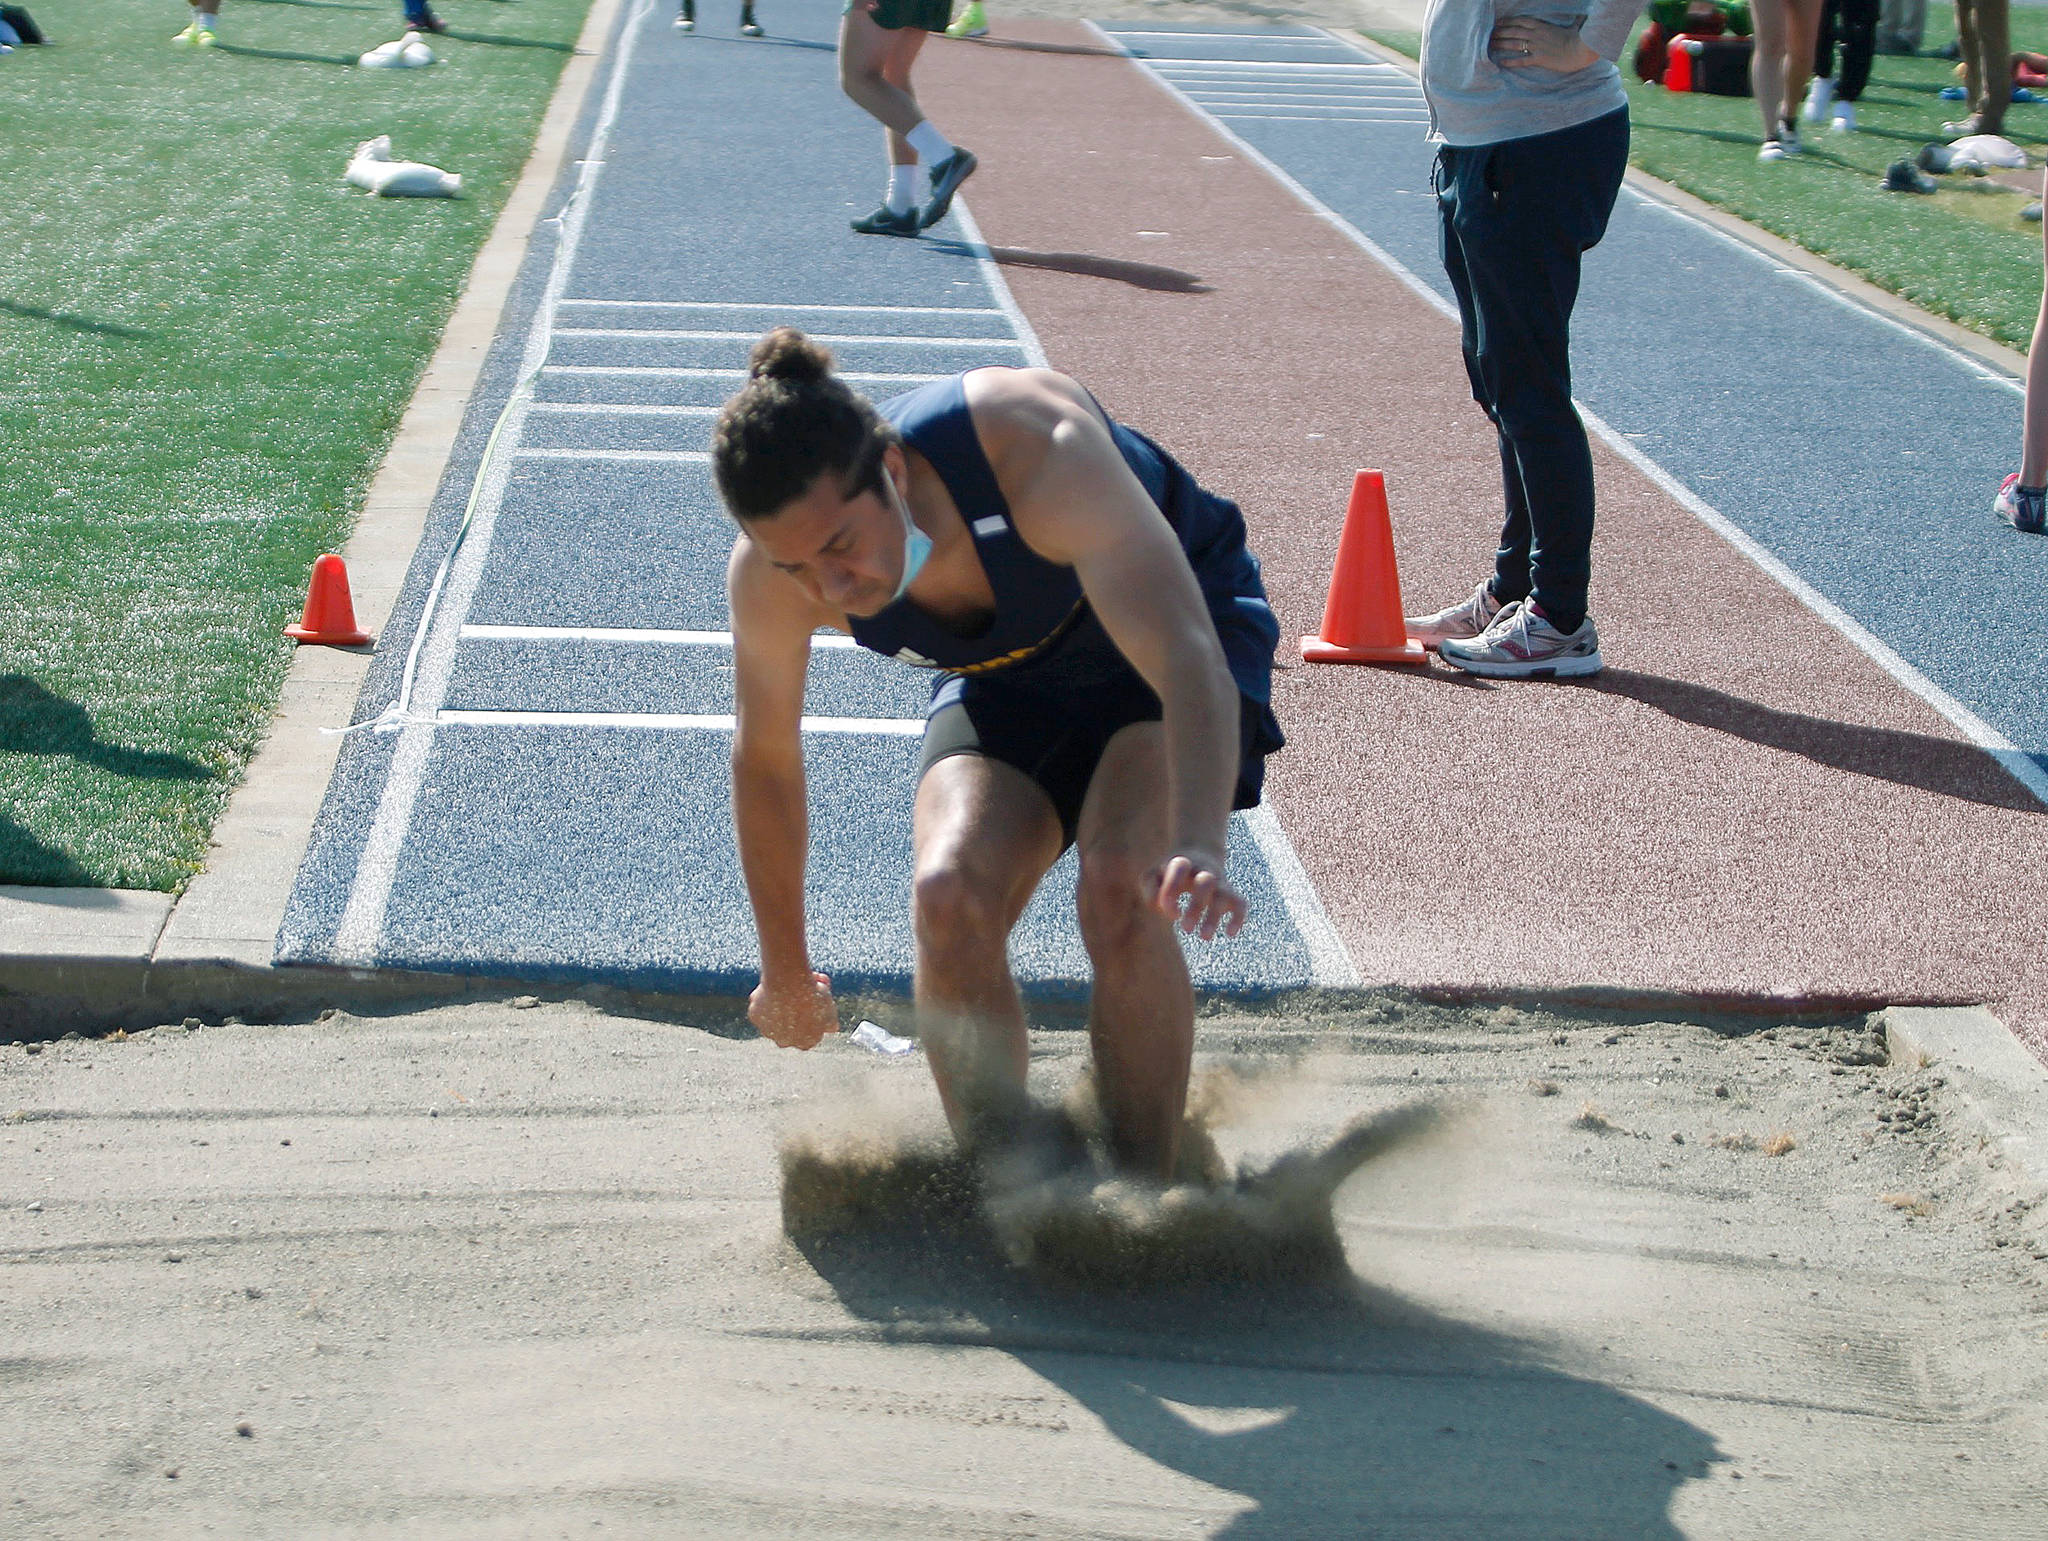 Isaac Agnew of Bainbridge makes his leap in the long jump. He finished seventh with a jump of 18 feet, 4.5 inches. (Mark Krulish/Kitsap News Group)